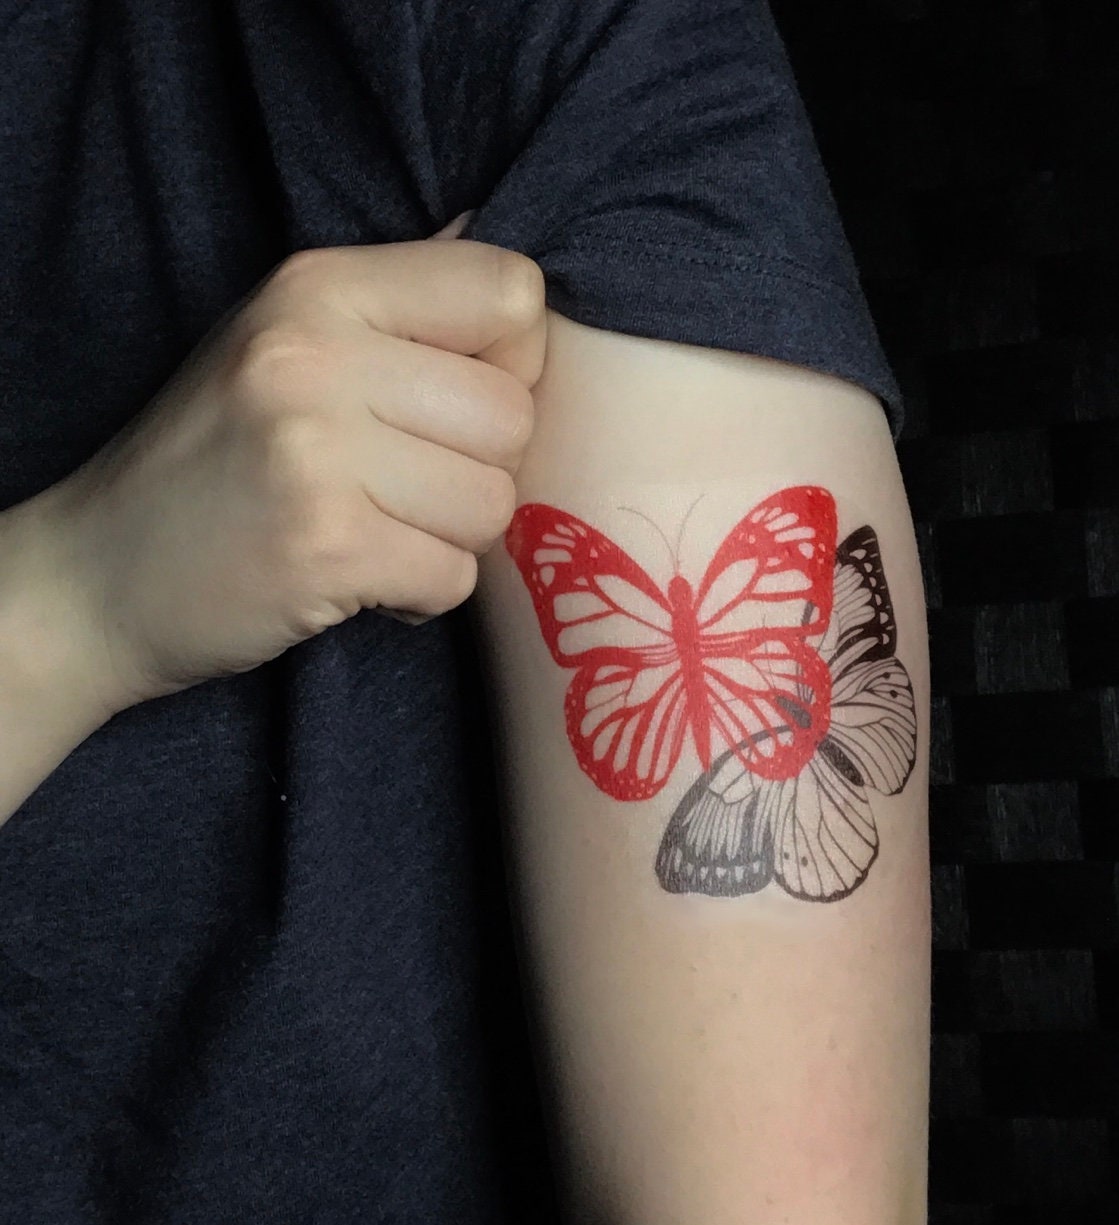 46 Red Butterfly Tattoo Designs with Meanings That Will Amaze You